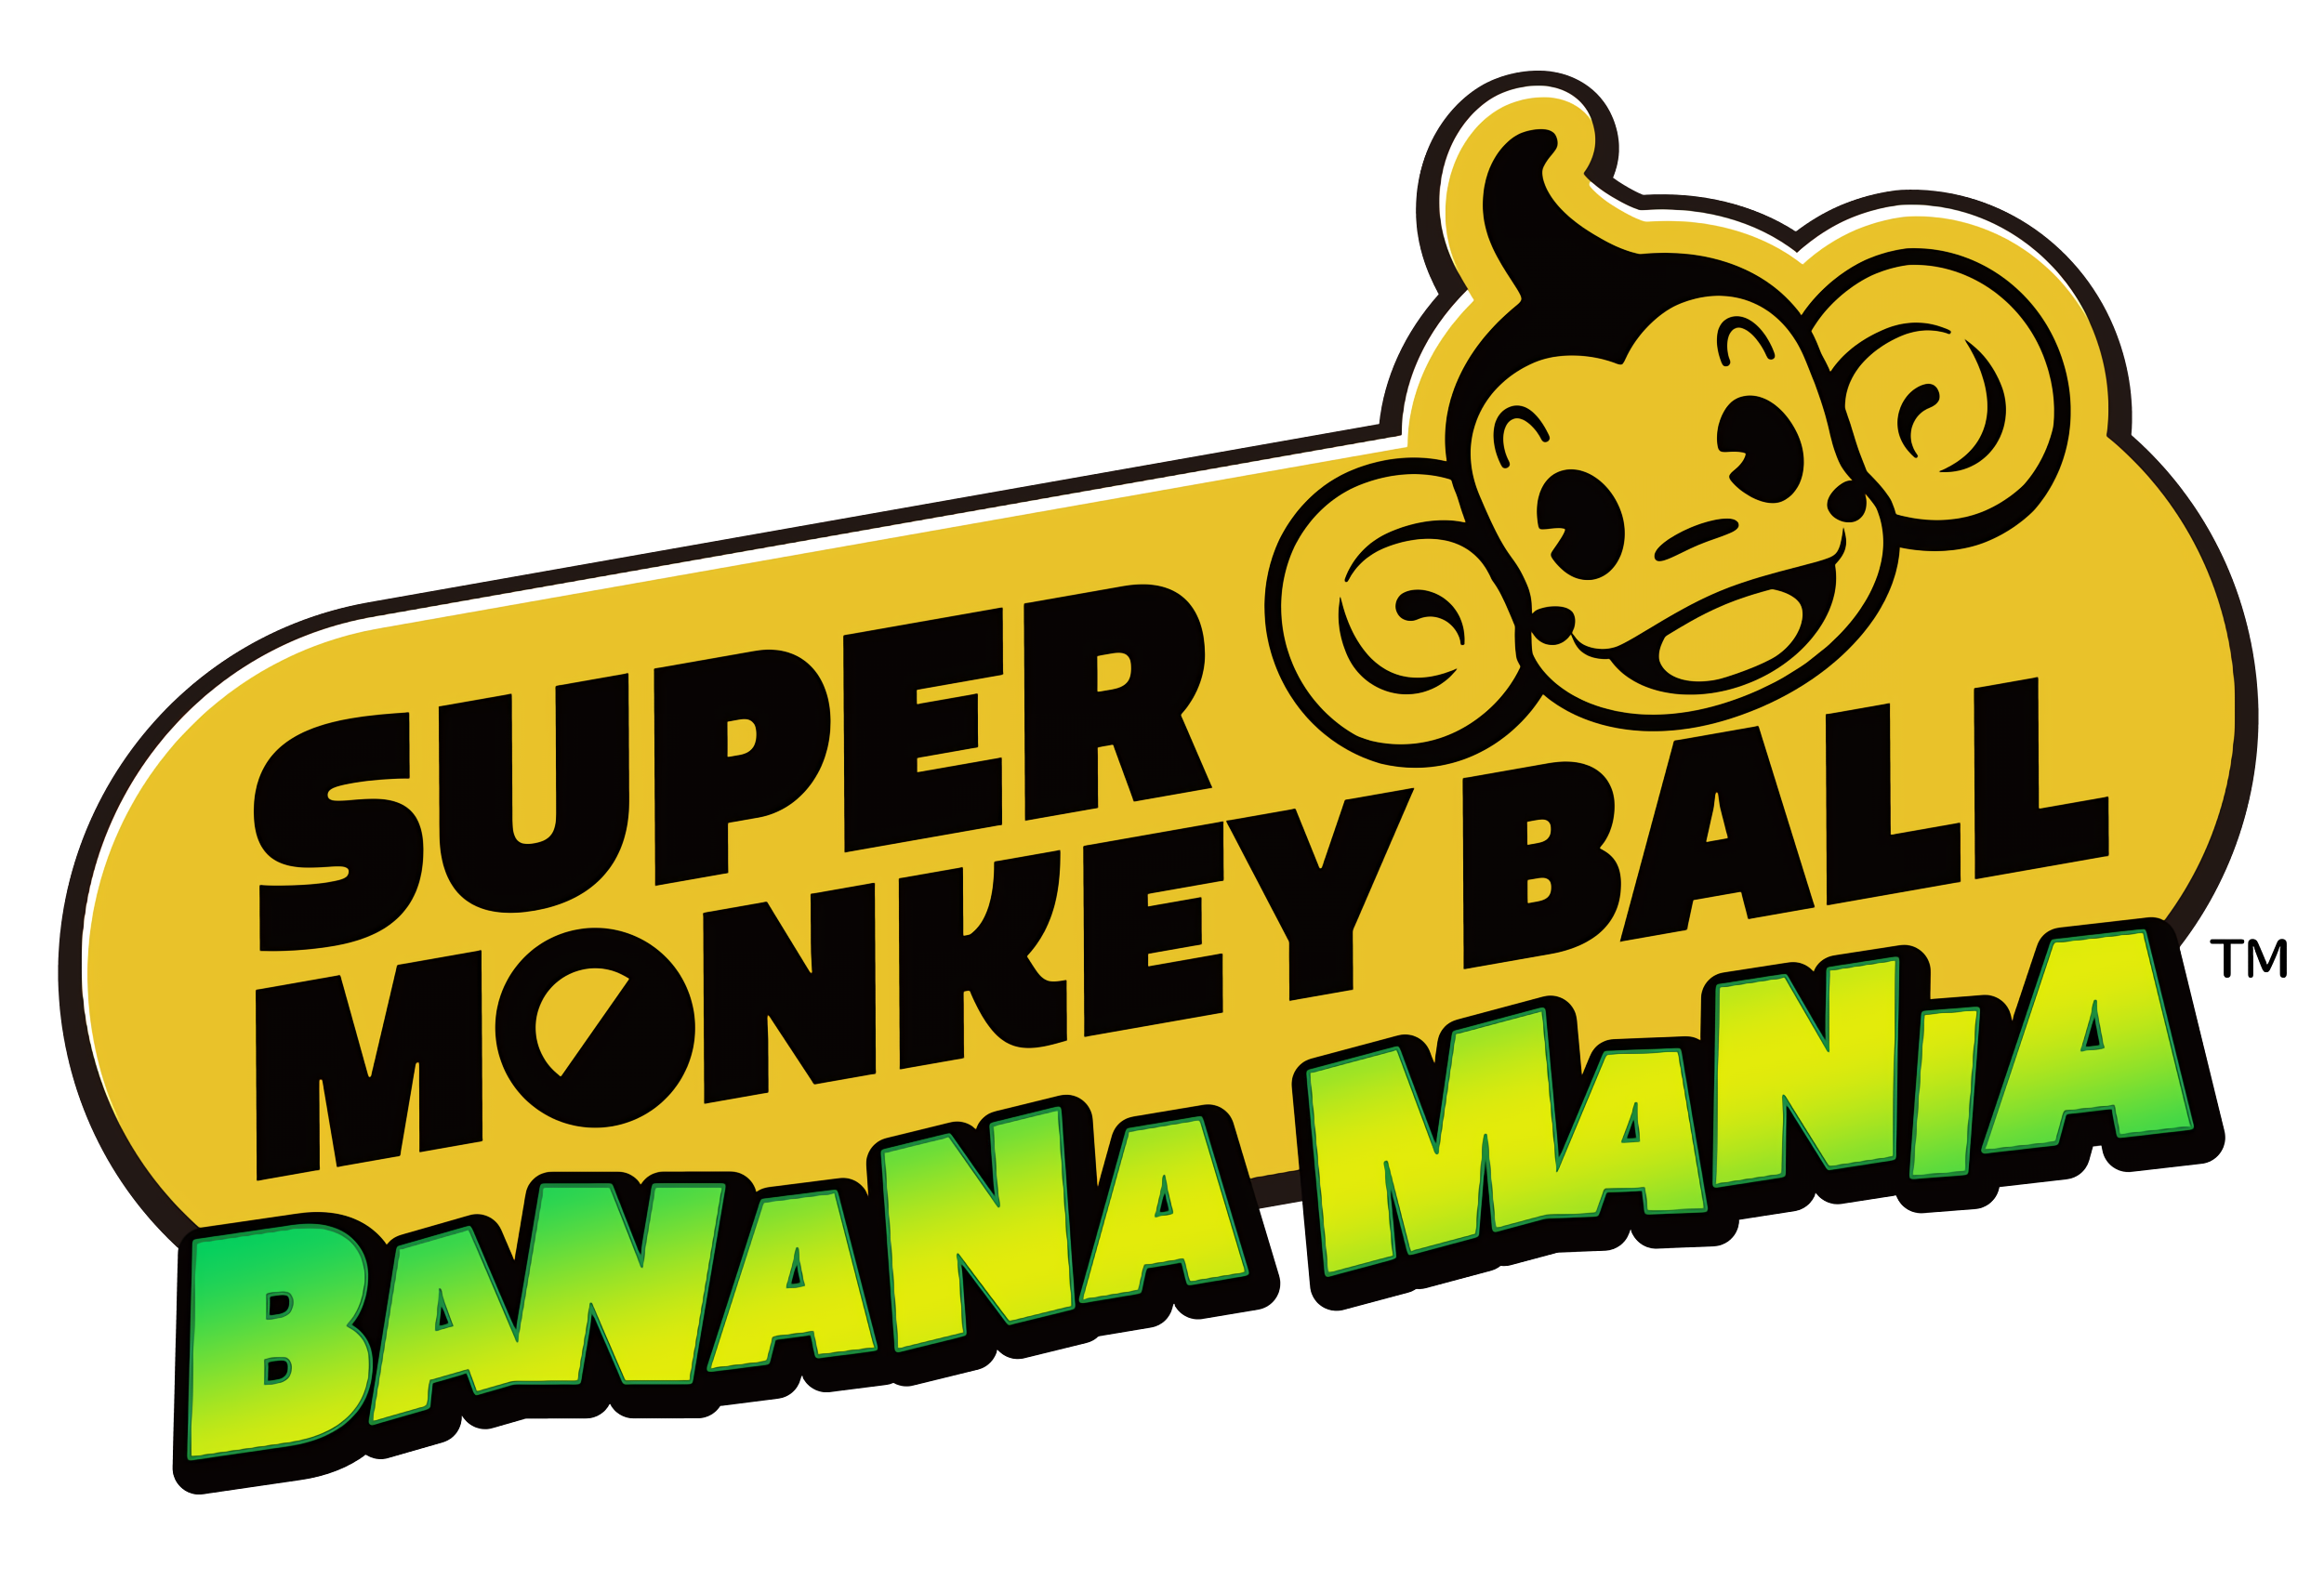 https://static.wikia.nocookie.net/supermonkeyball/images/2/23/SMBBM_Logo.png/revision/latest?cb=20220621193040